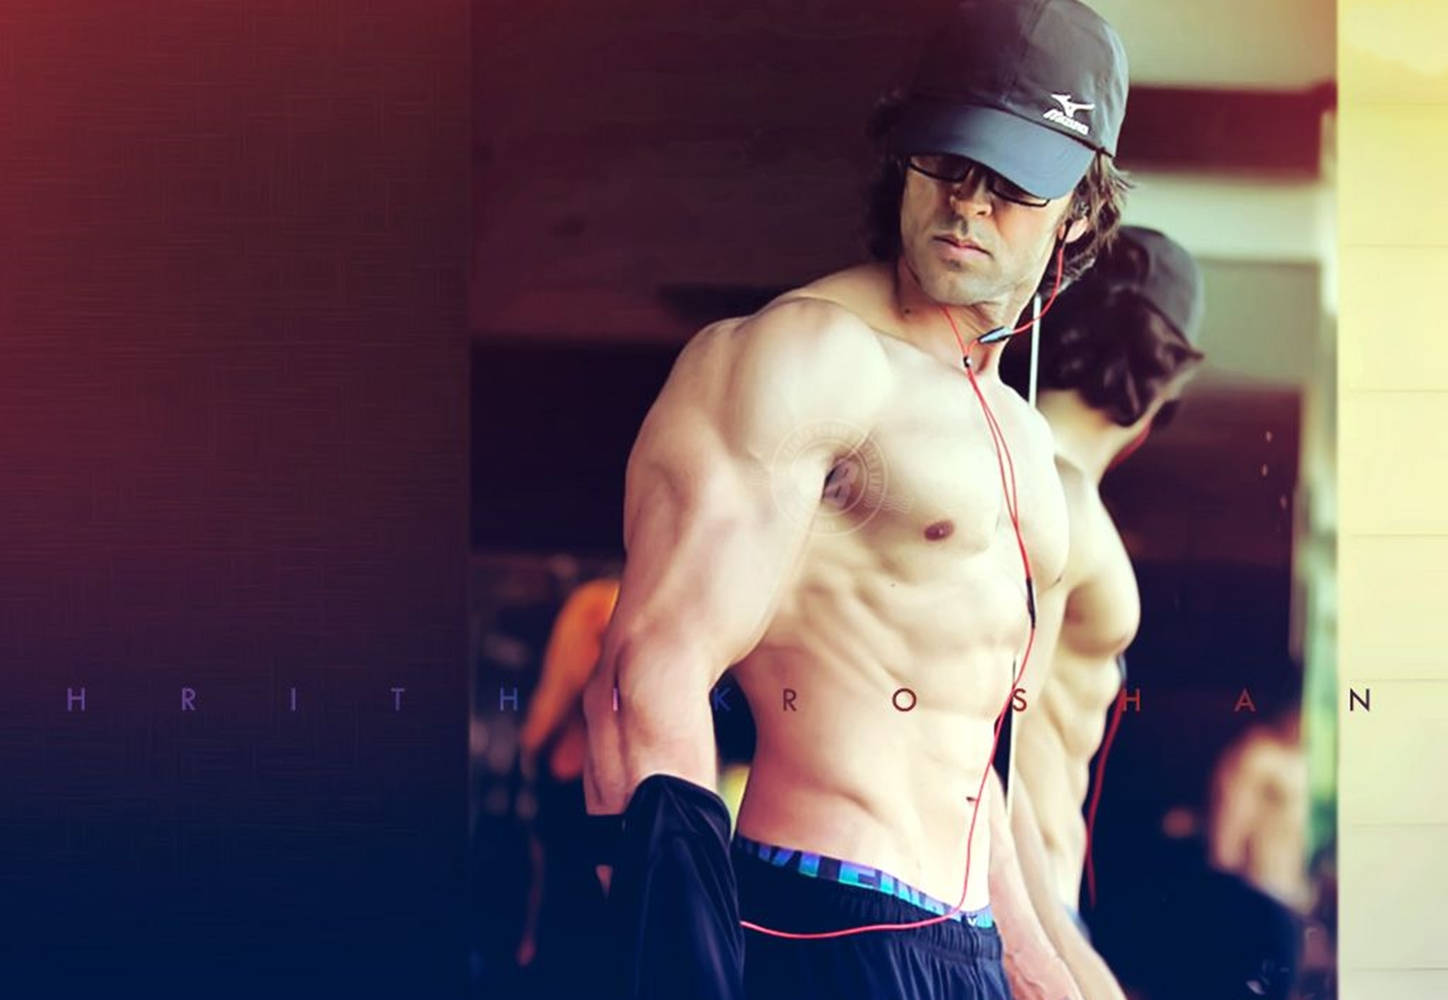 Download Hrithik Roshan Body Working Out At Gym Wallpaper 